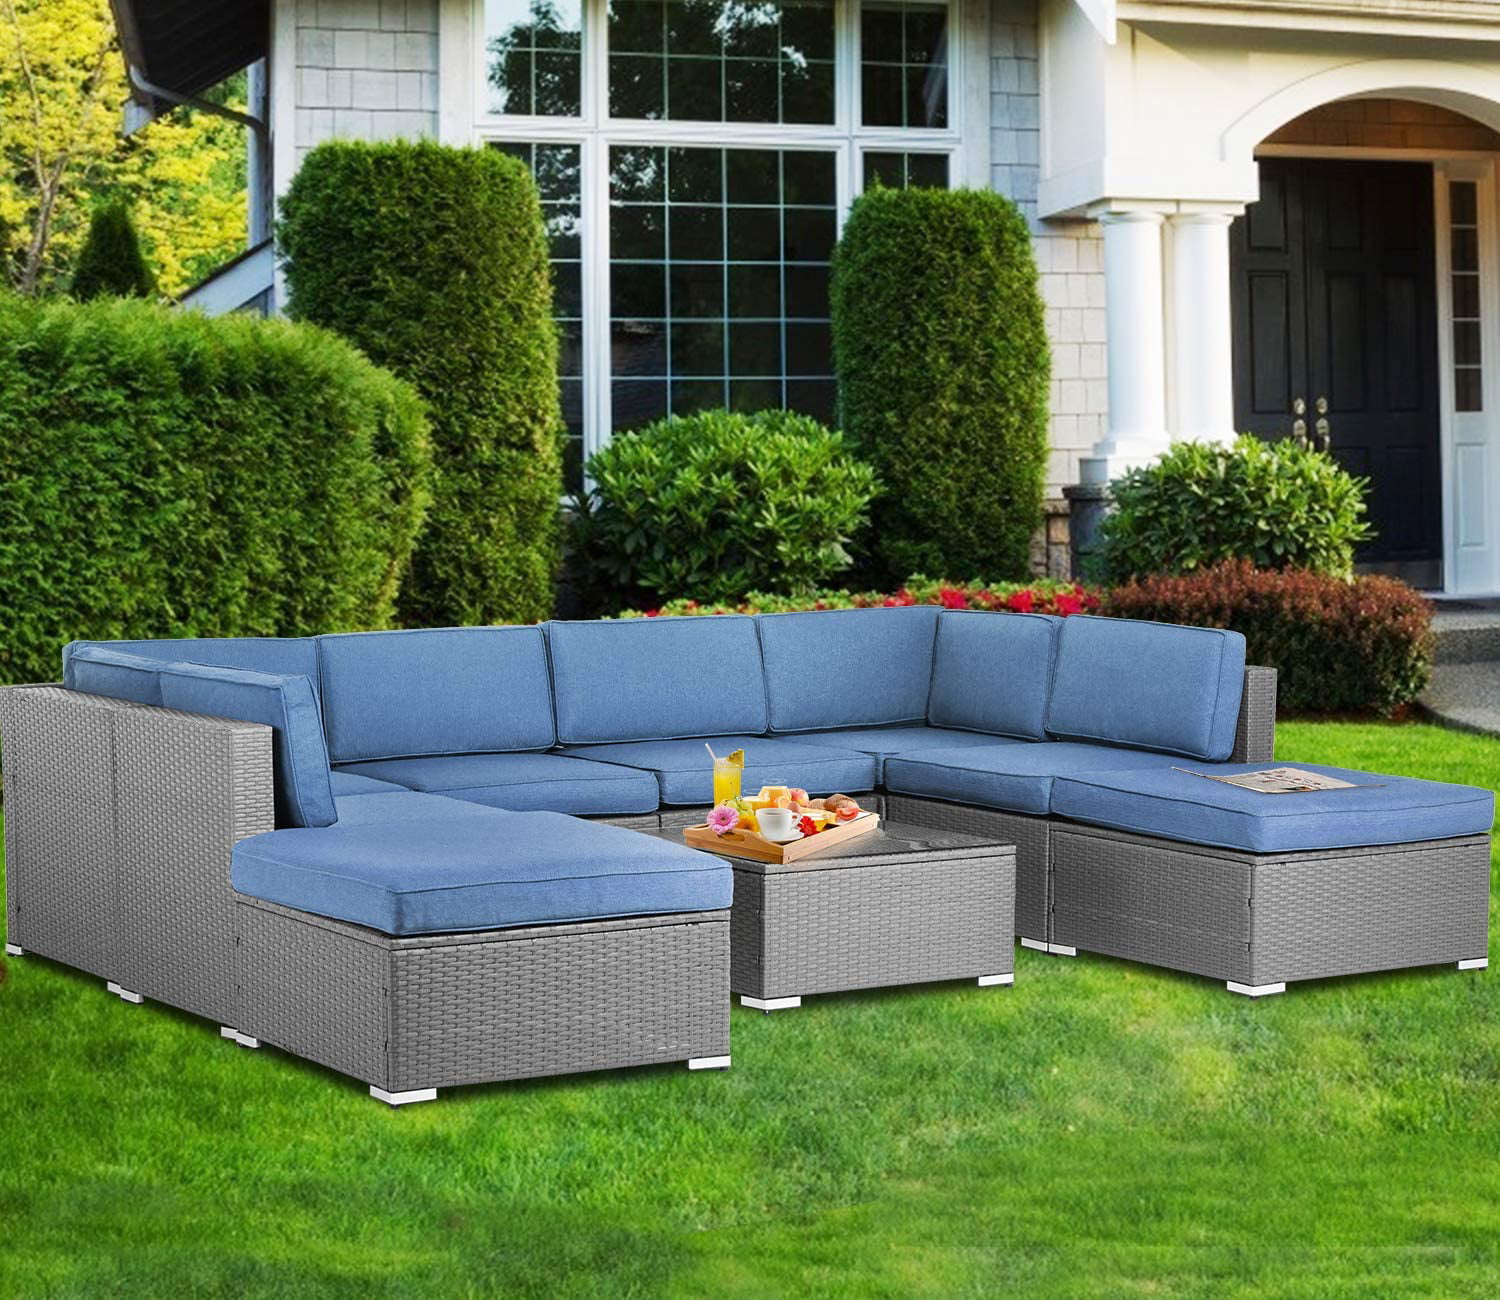 outdoor lawn furniture